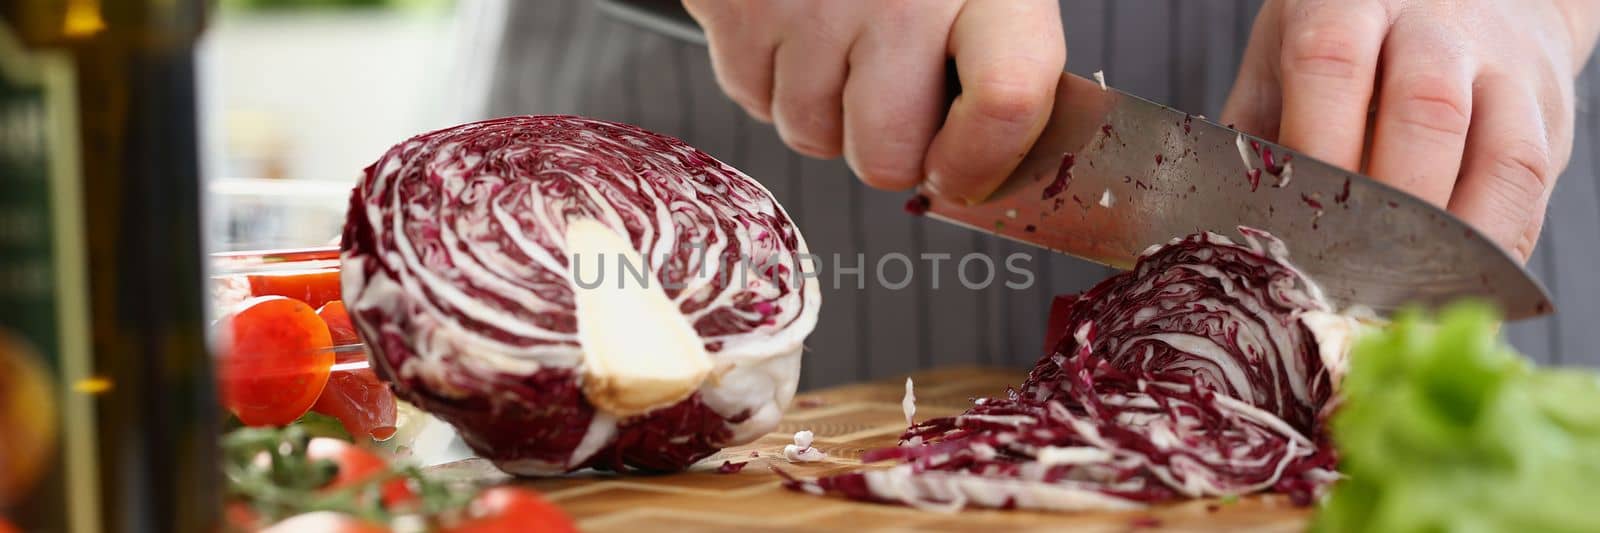 Cutting red cabbage with knife on cutting board in kitchen by kuprevich